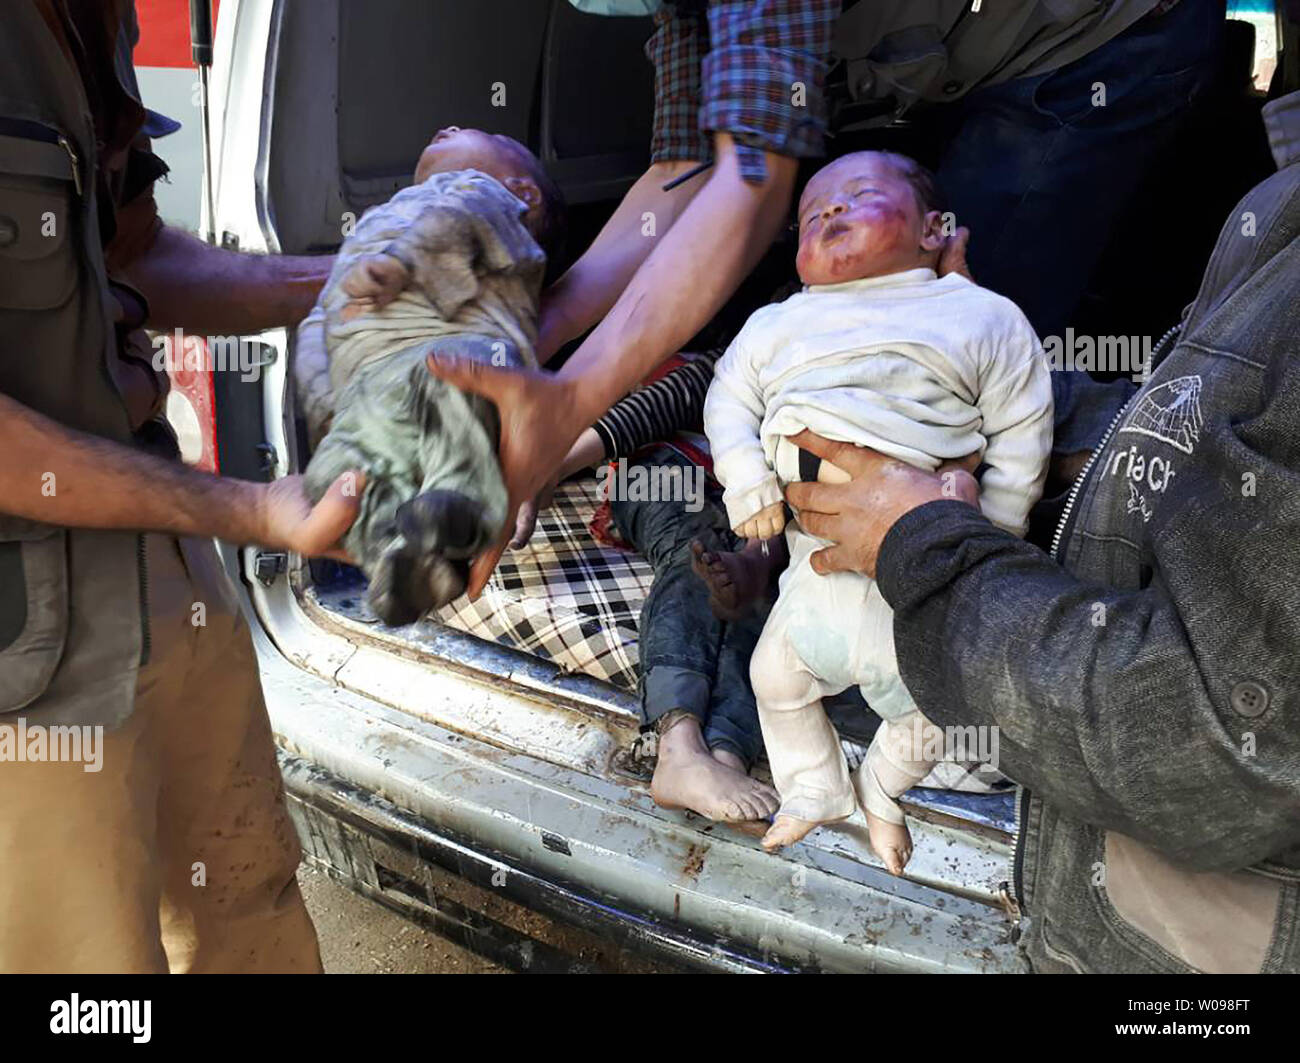 *** EDITORS NOTE CONTENT*** Syrian men carry the dead bodies of children after an alleged chemical attack on the rebel-held town of Douma in Syria. At least 78 civilians, including women and children, died according to the initial findings.   Photo by Mohammed Hassan/UPI Stock Photo